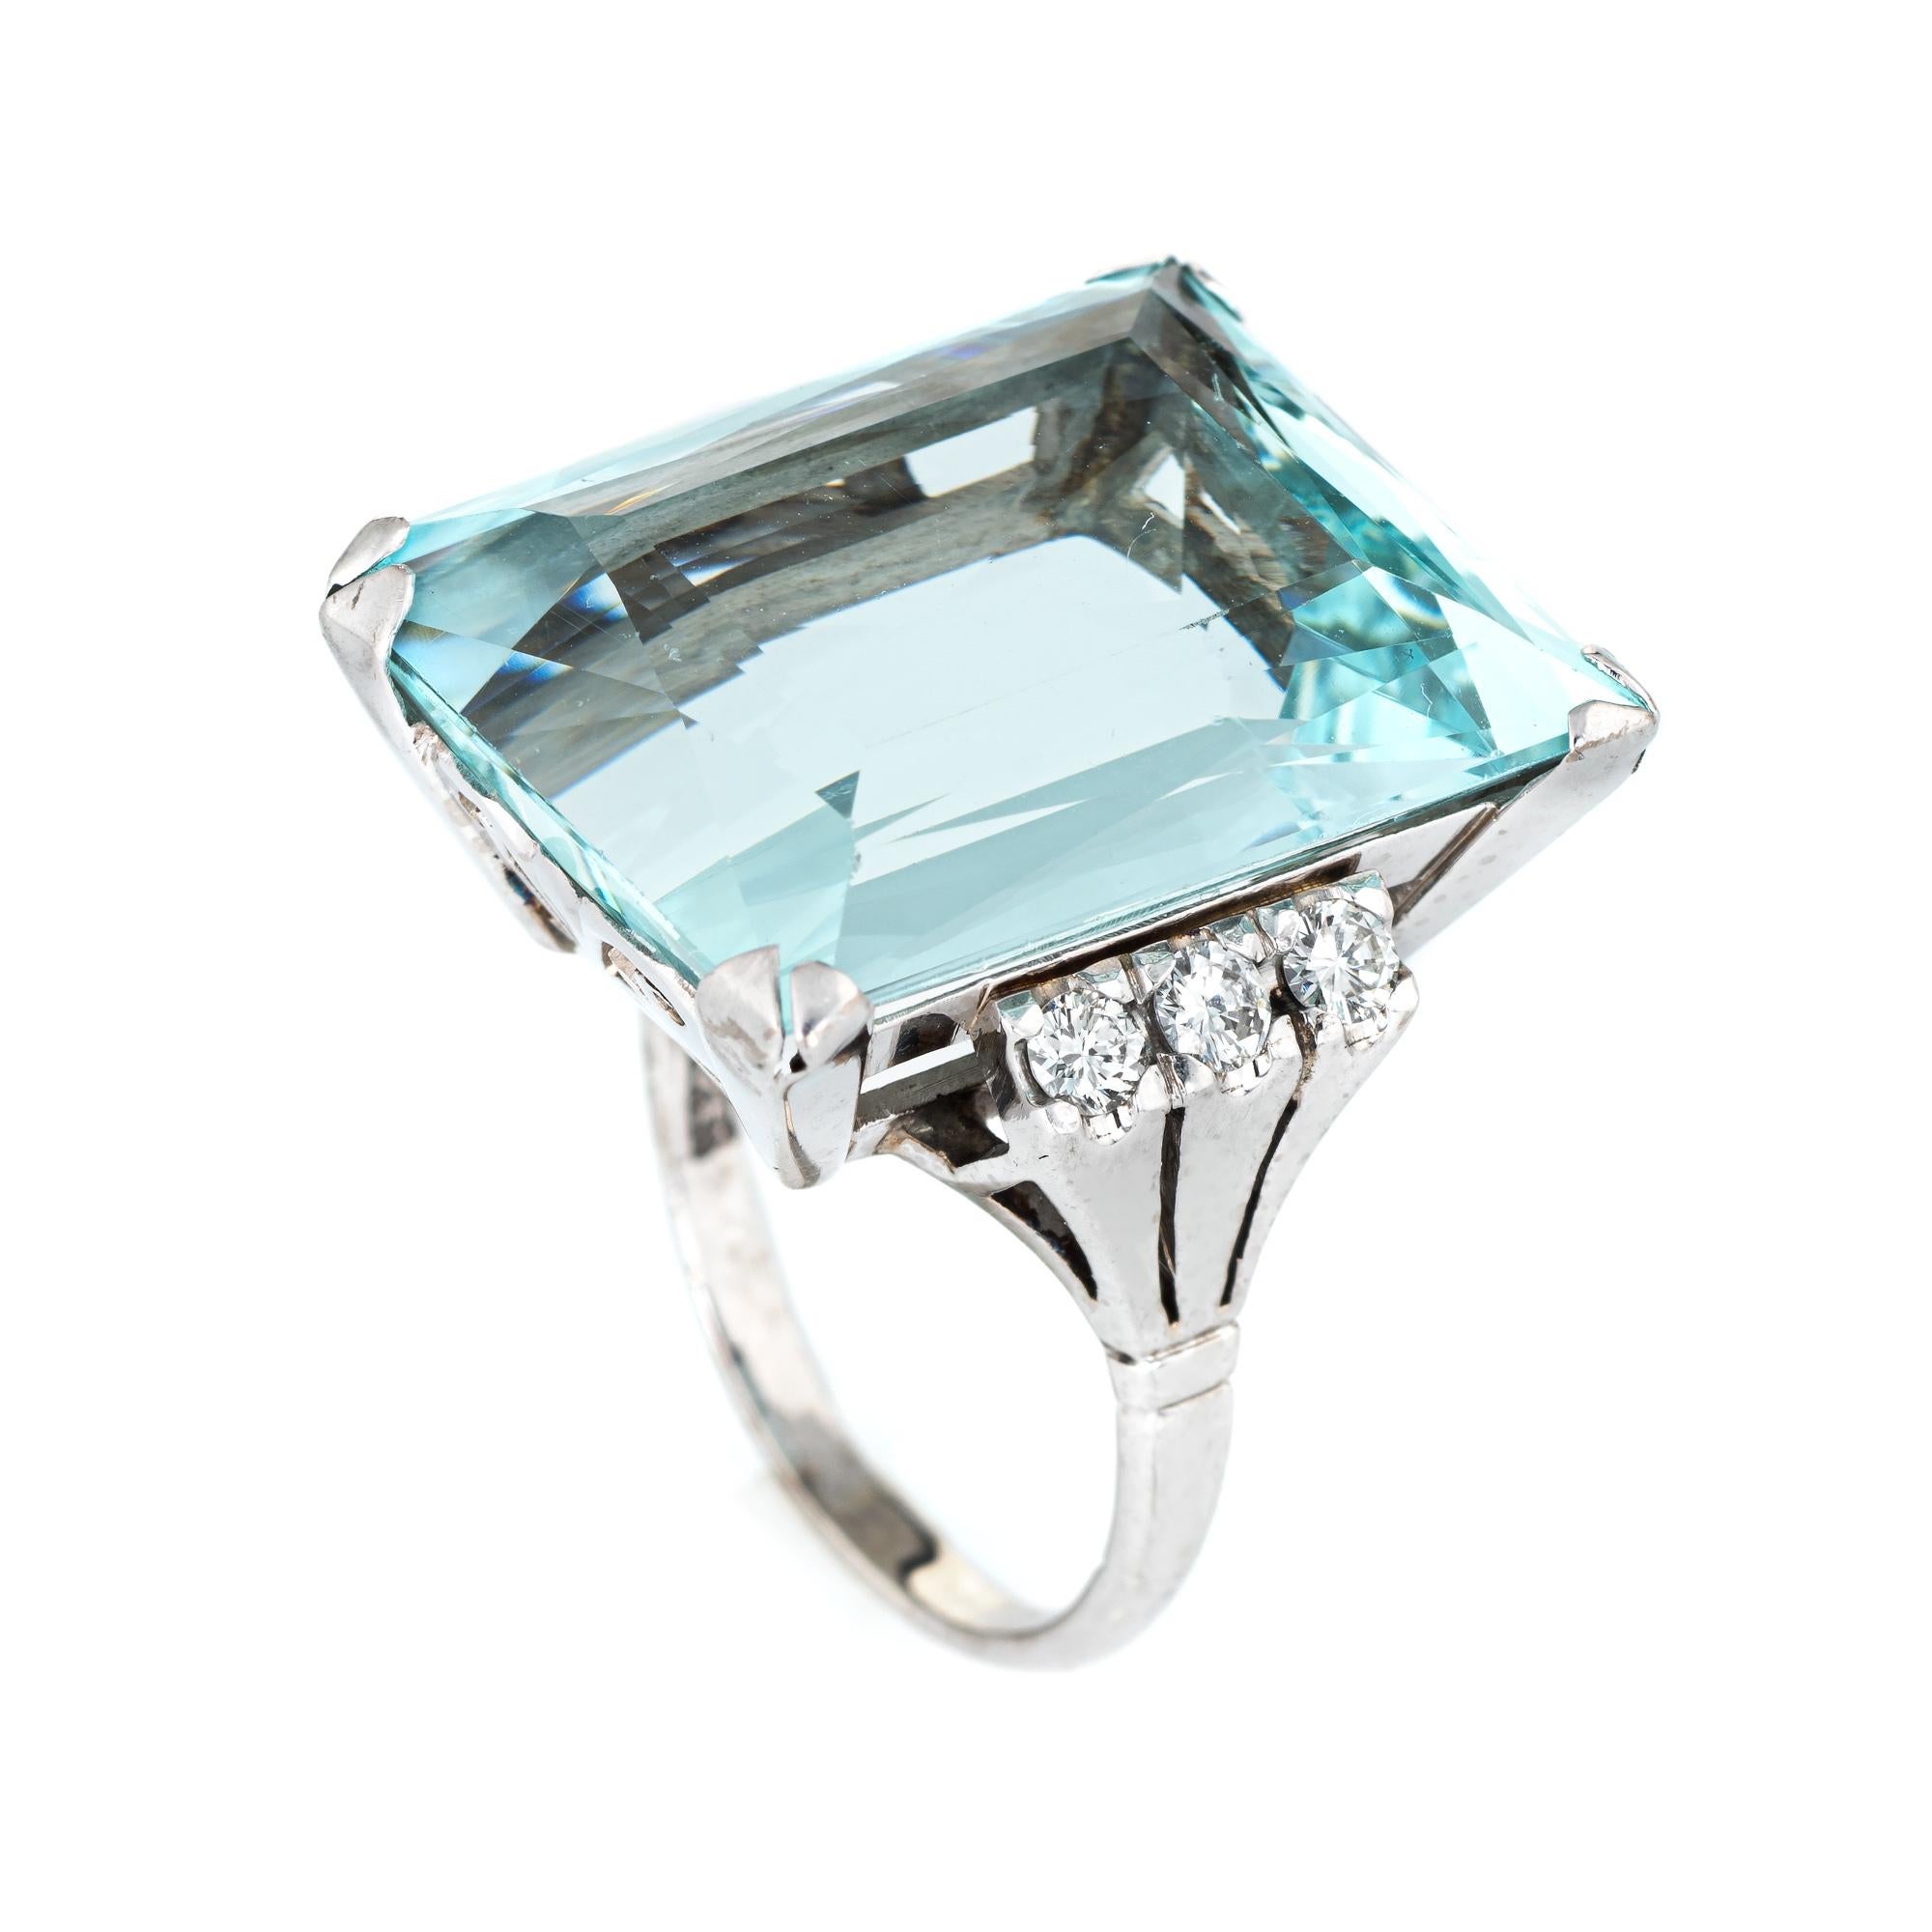 Stylish vintage aquamarine & diamond cocktail ring (circa 1950s to 1960s) crafted in 14 karat white gold. 

Faceted square cut aquamarine measures 22mm x 18.5mm (estimated at 30 carats) is accented with six estimated 0.05 carat round brilliant cut